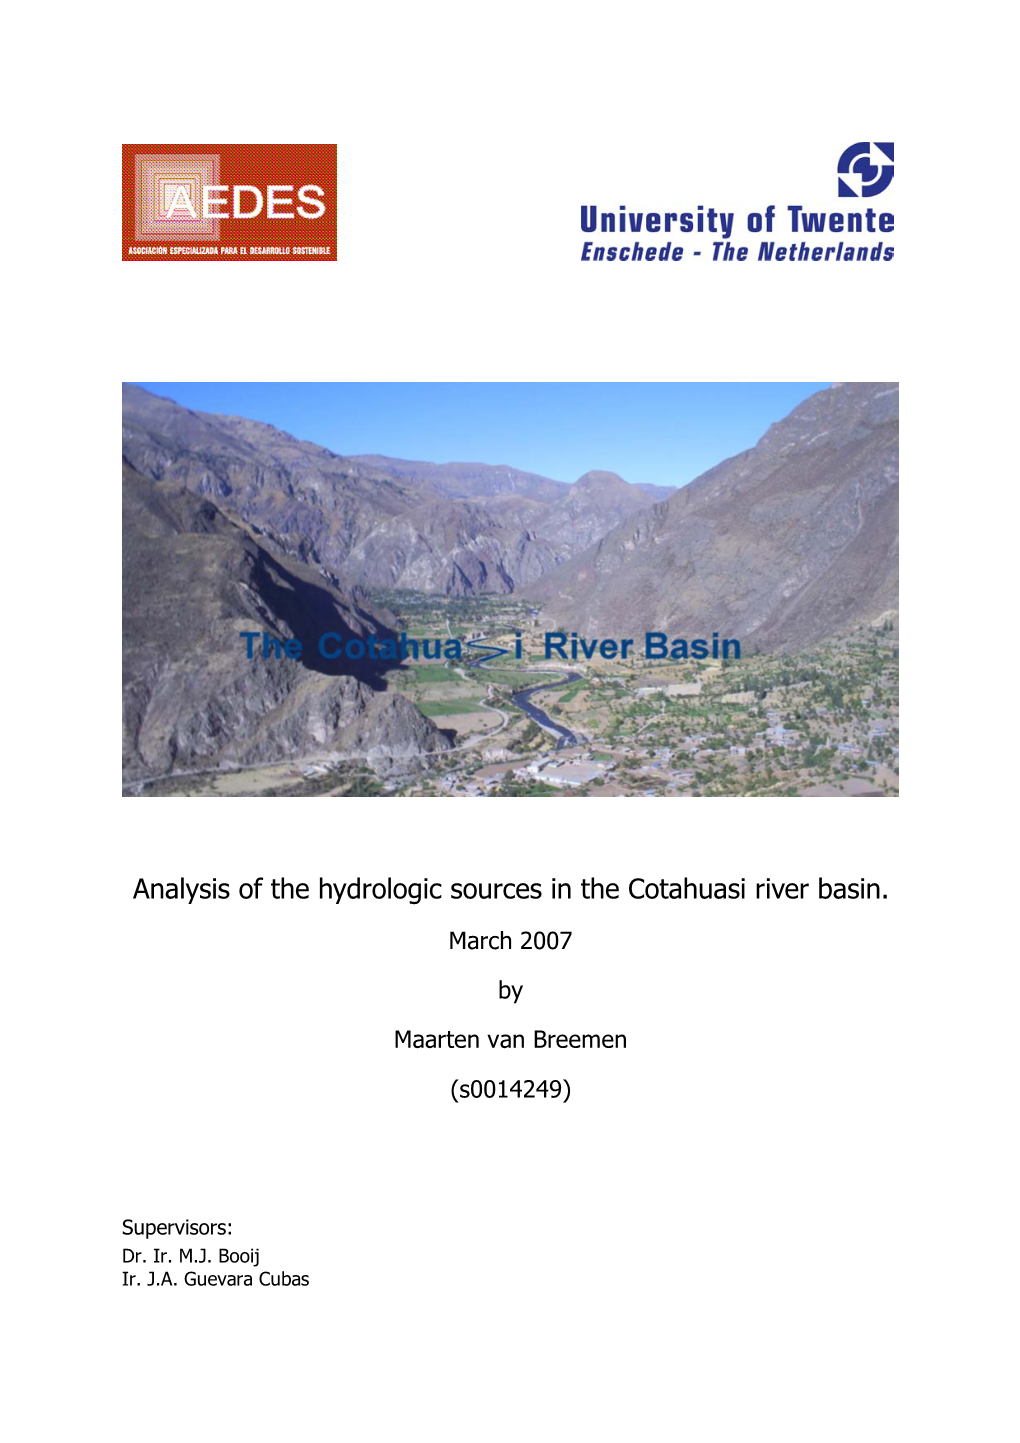 Analysis of the Hydrologic Sources in the Cotahuasi River Basin